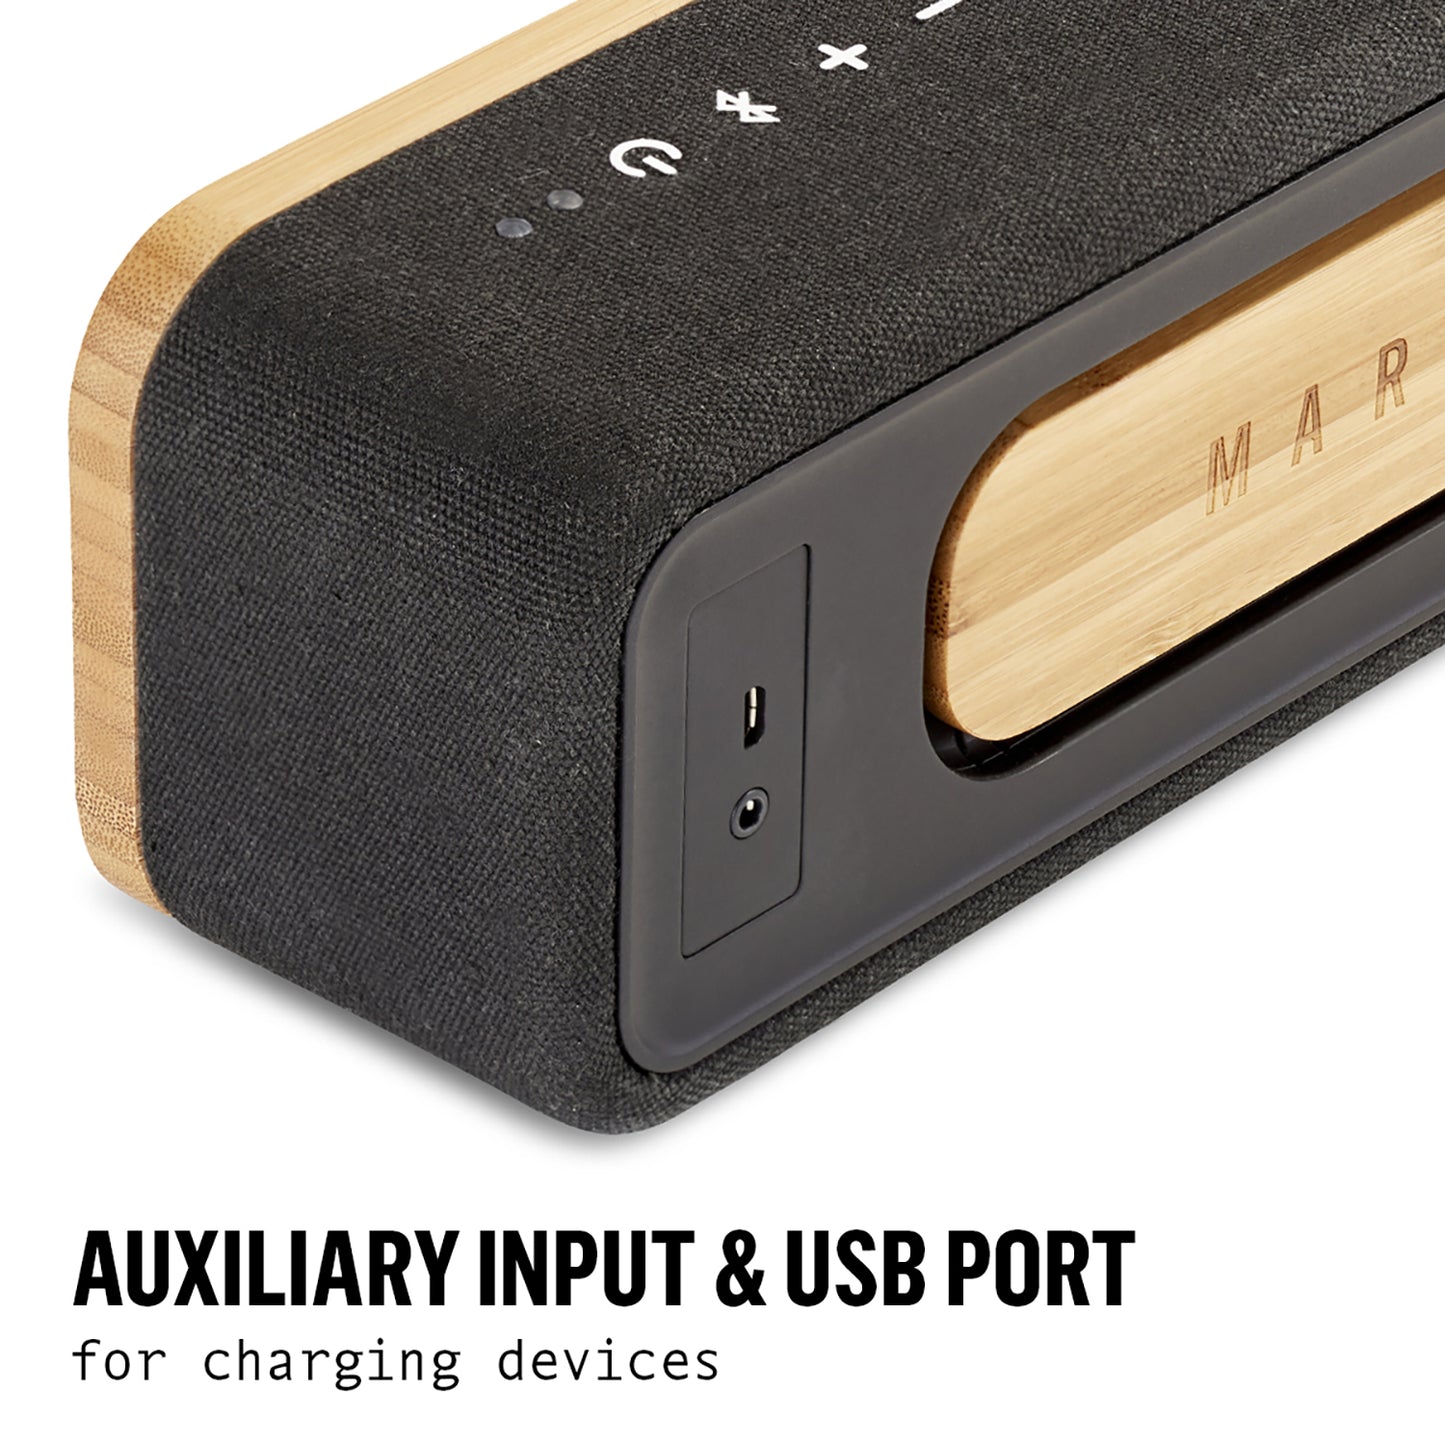 House of Marley Get Together Mini bluetooth speaker black - Crystal clear sound, durable design and wireless freedom